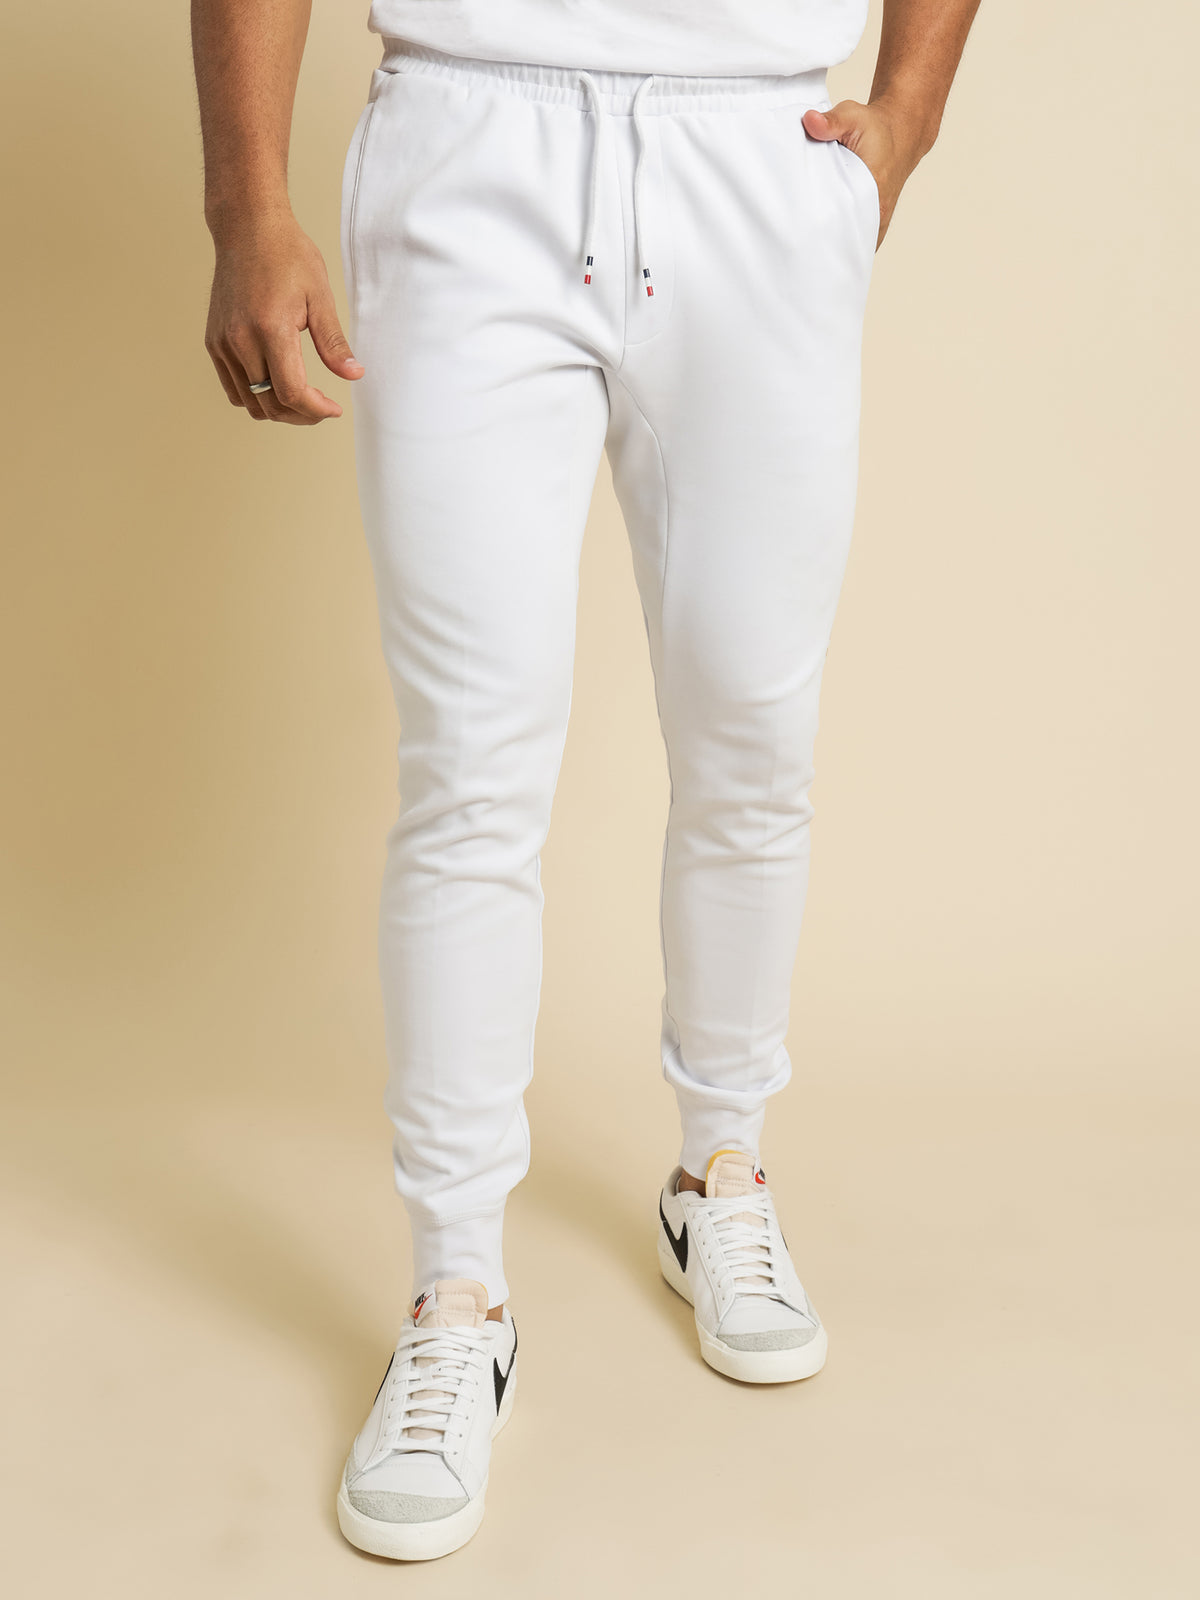 Roissey Foil Trackpants in White